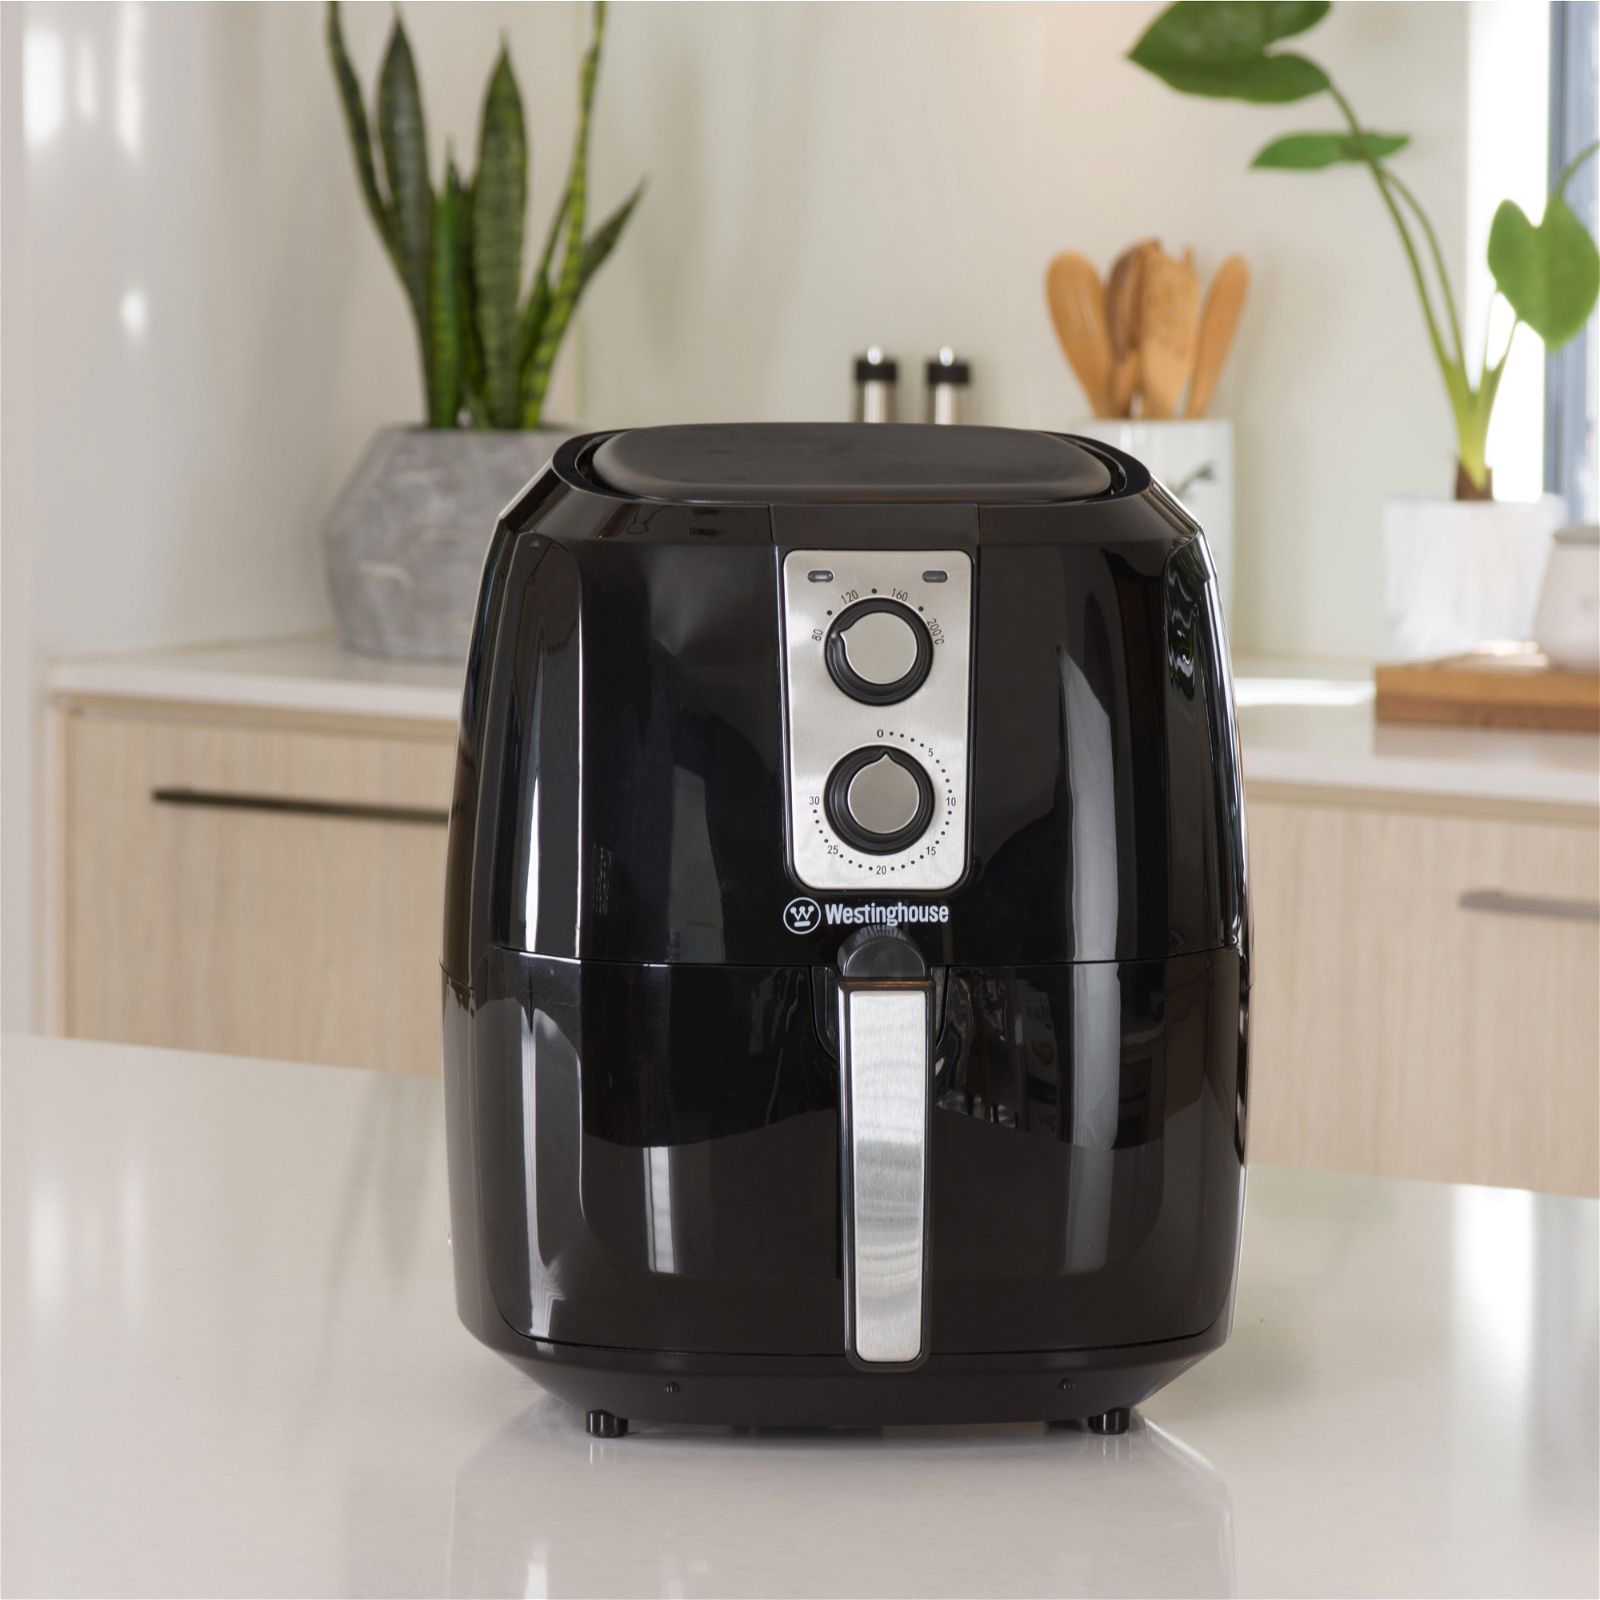 Westinghouse Air Fryer 1800W 5.2L-#product_category#- Distributed by: RVM under license